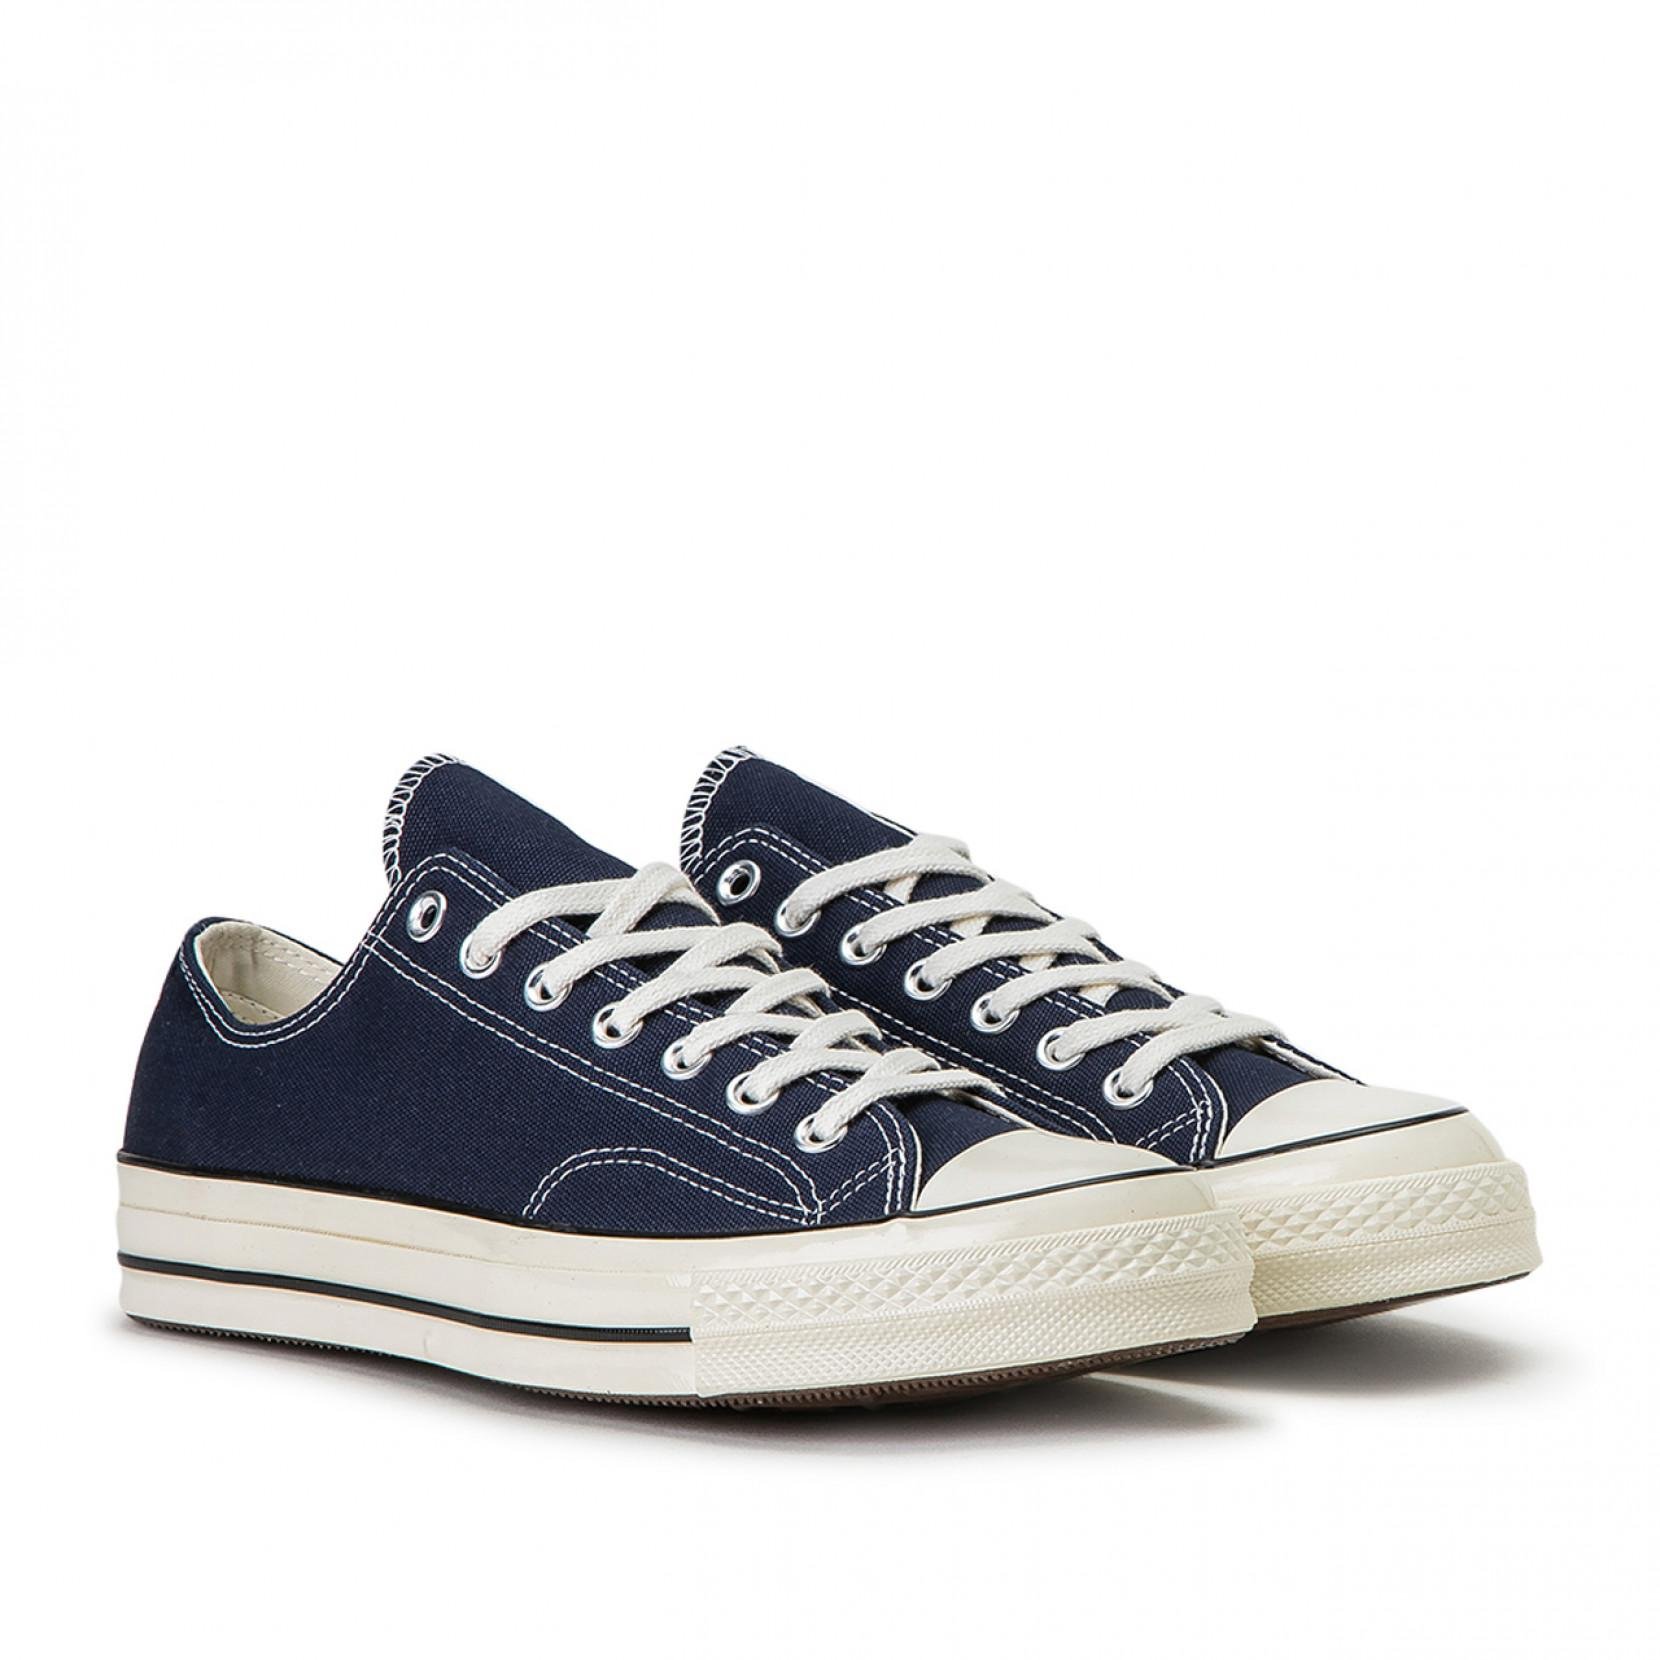 Converse Canvas Chuck Taylor 70 Ox Low in Navy (Blue) for Men - Lyst